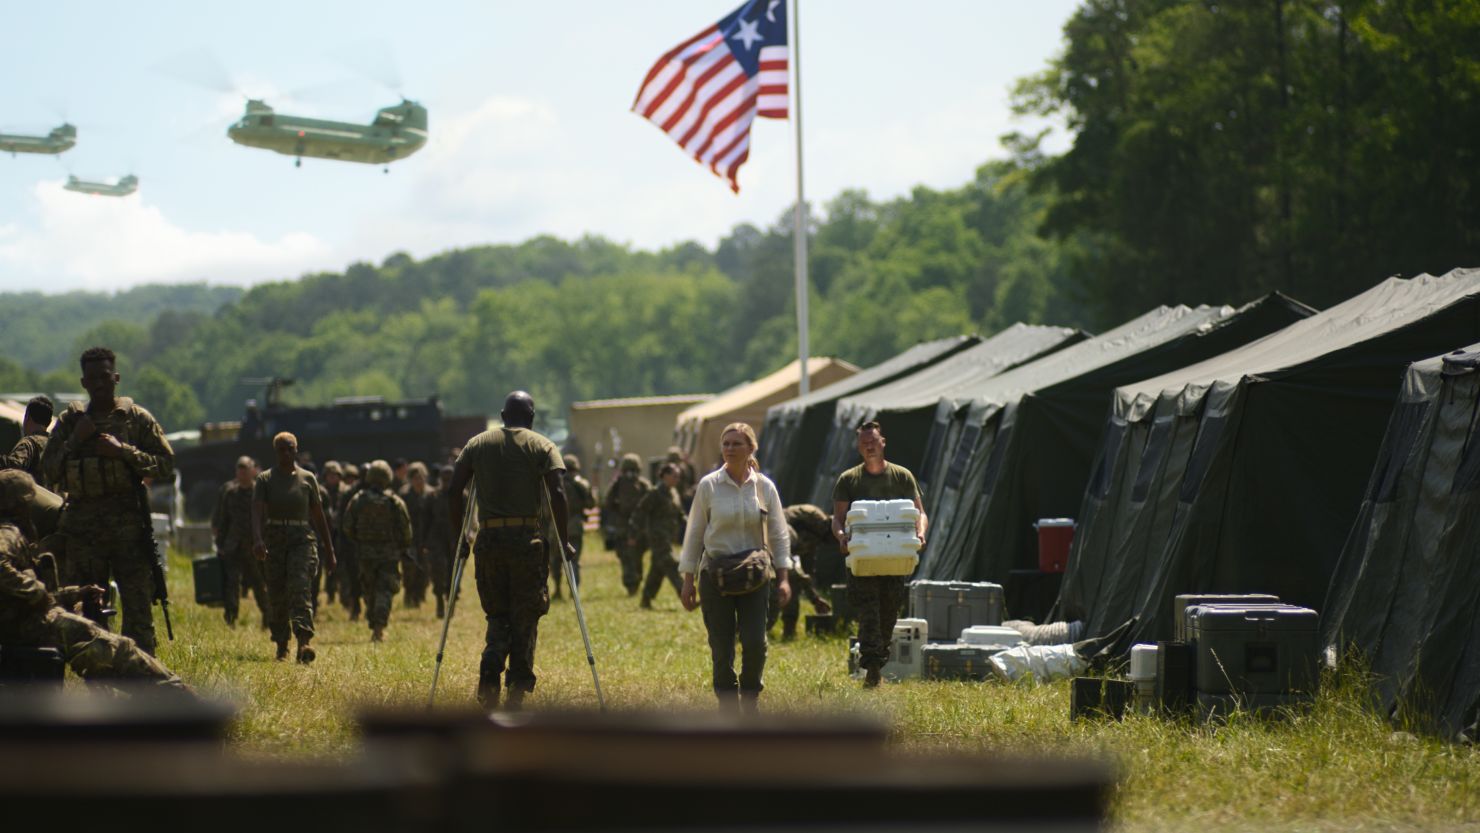 Kirsten Dunst, center, plays a photojournalist in "Civil War." The movie topped the US box office in recent weeks.